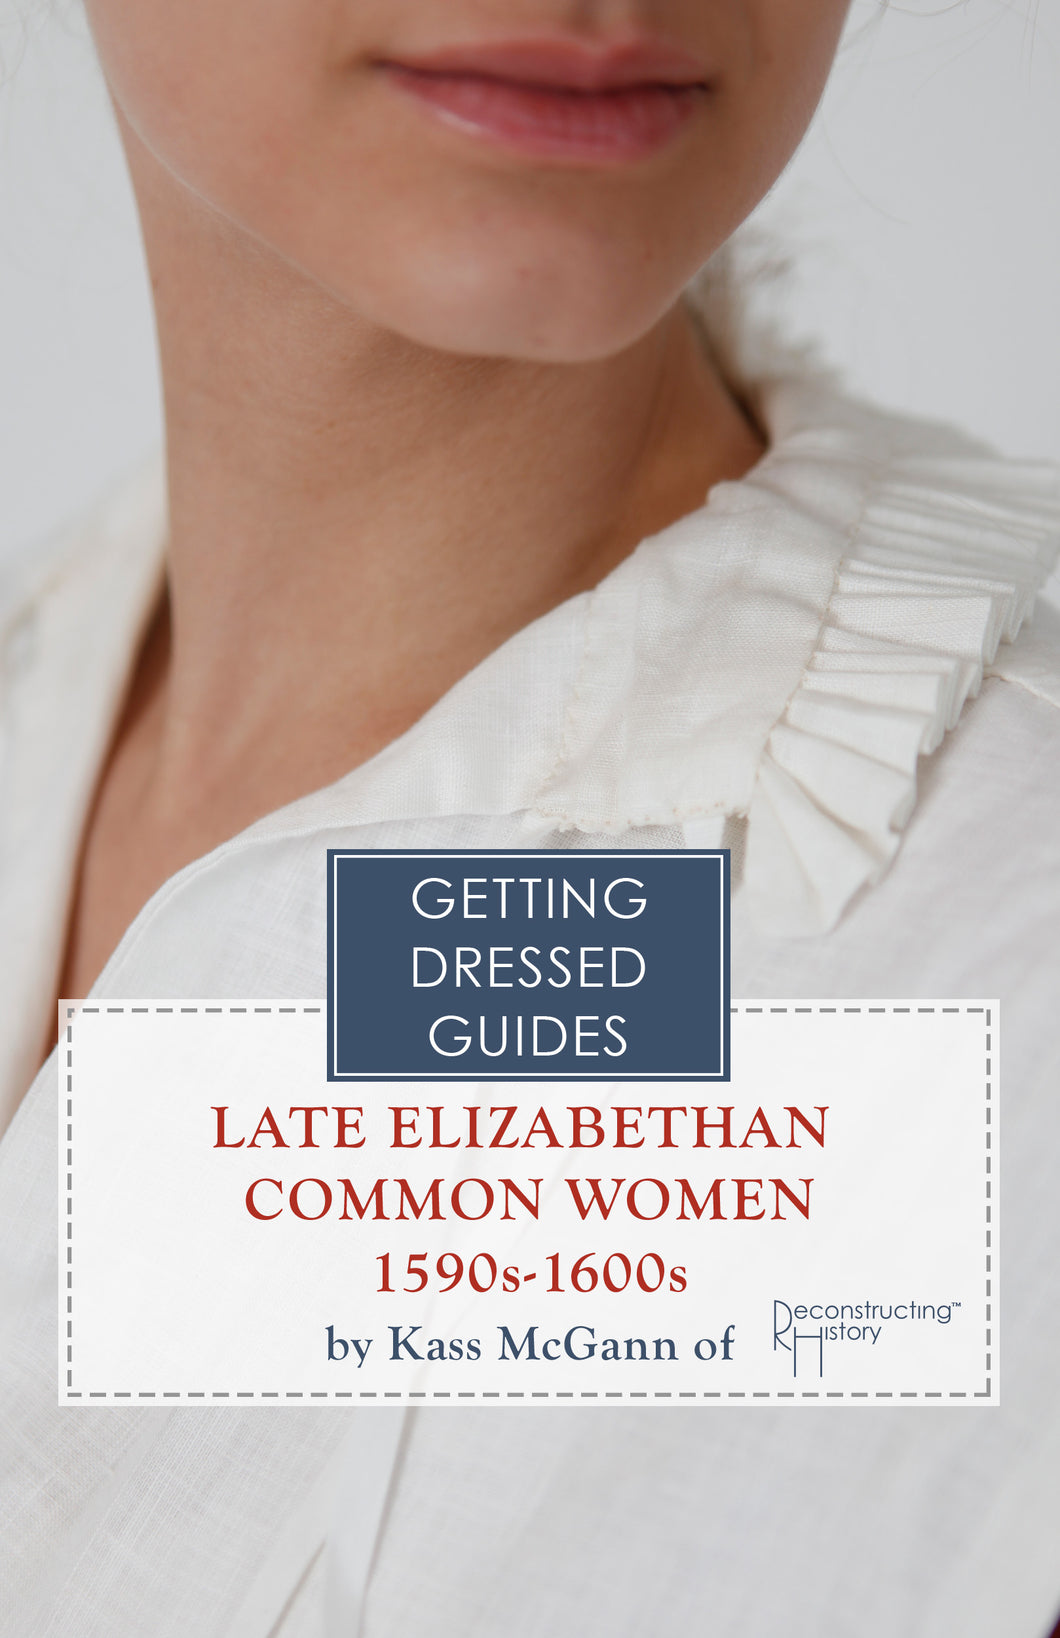 16th century Late Elizabethan Common Women's Getting Dressed Guide